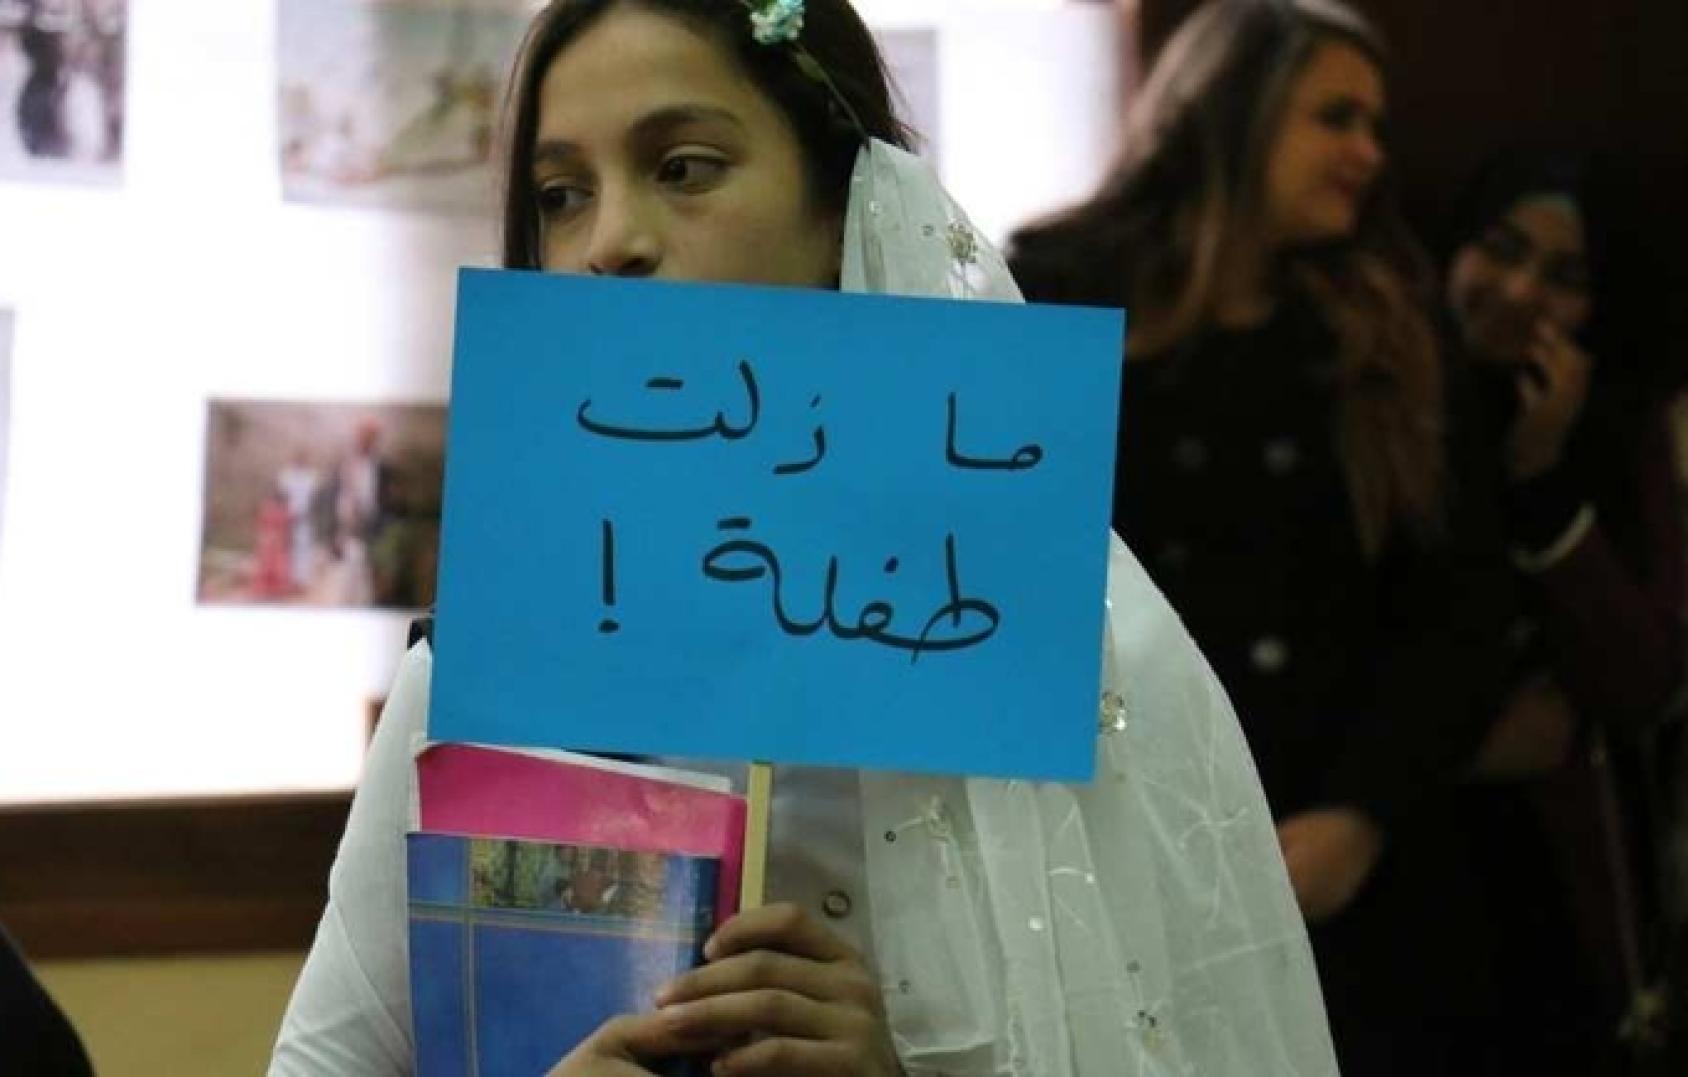 A young girl wearing a wedding dress and holding a sign that says: I am still a child.